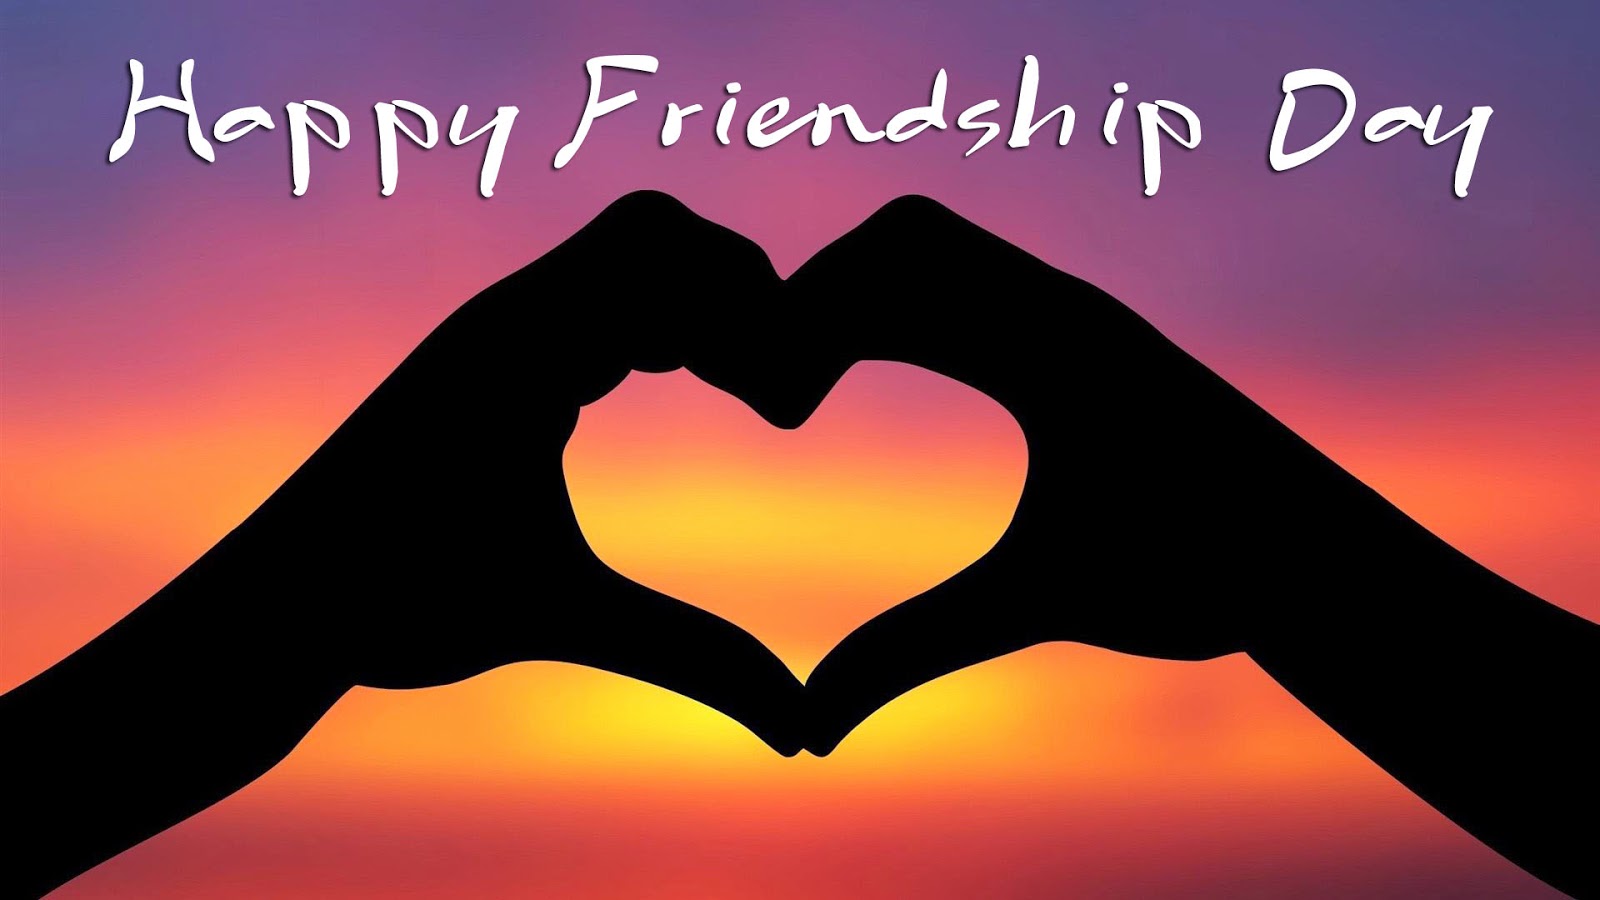 Friendship Day 2015 New Latest HD Wallpaper Images Download |  